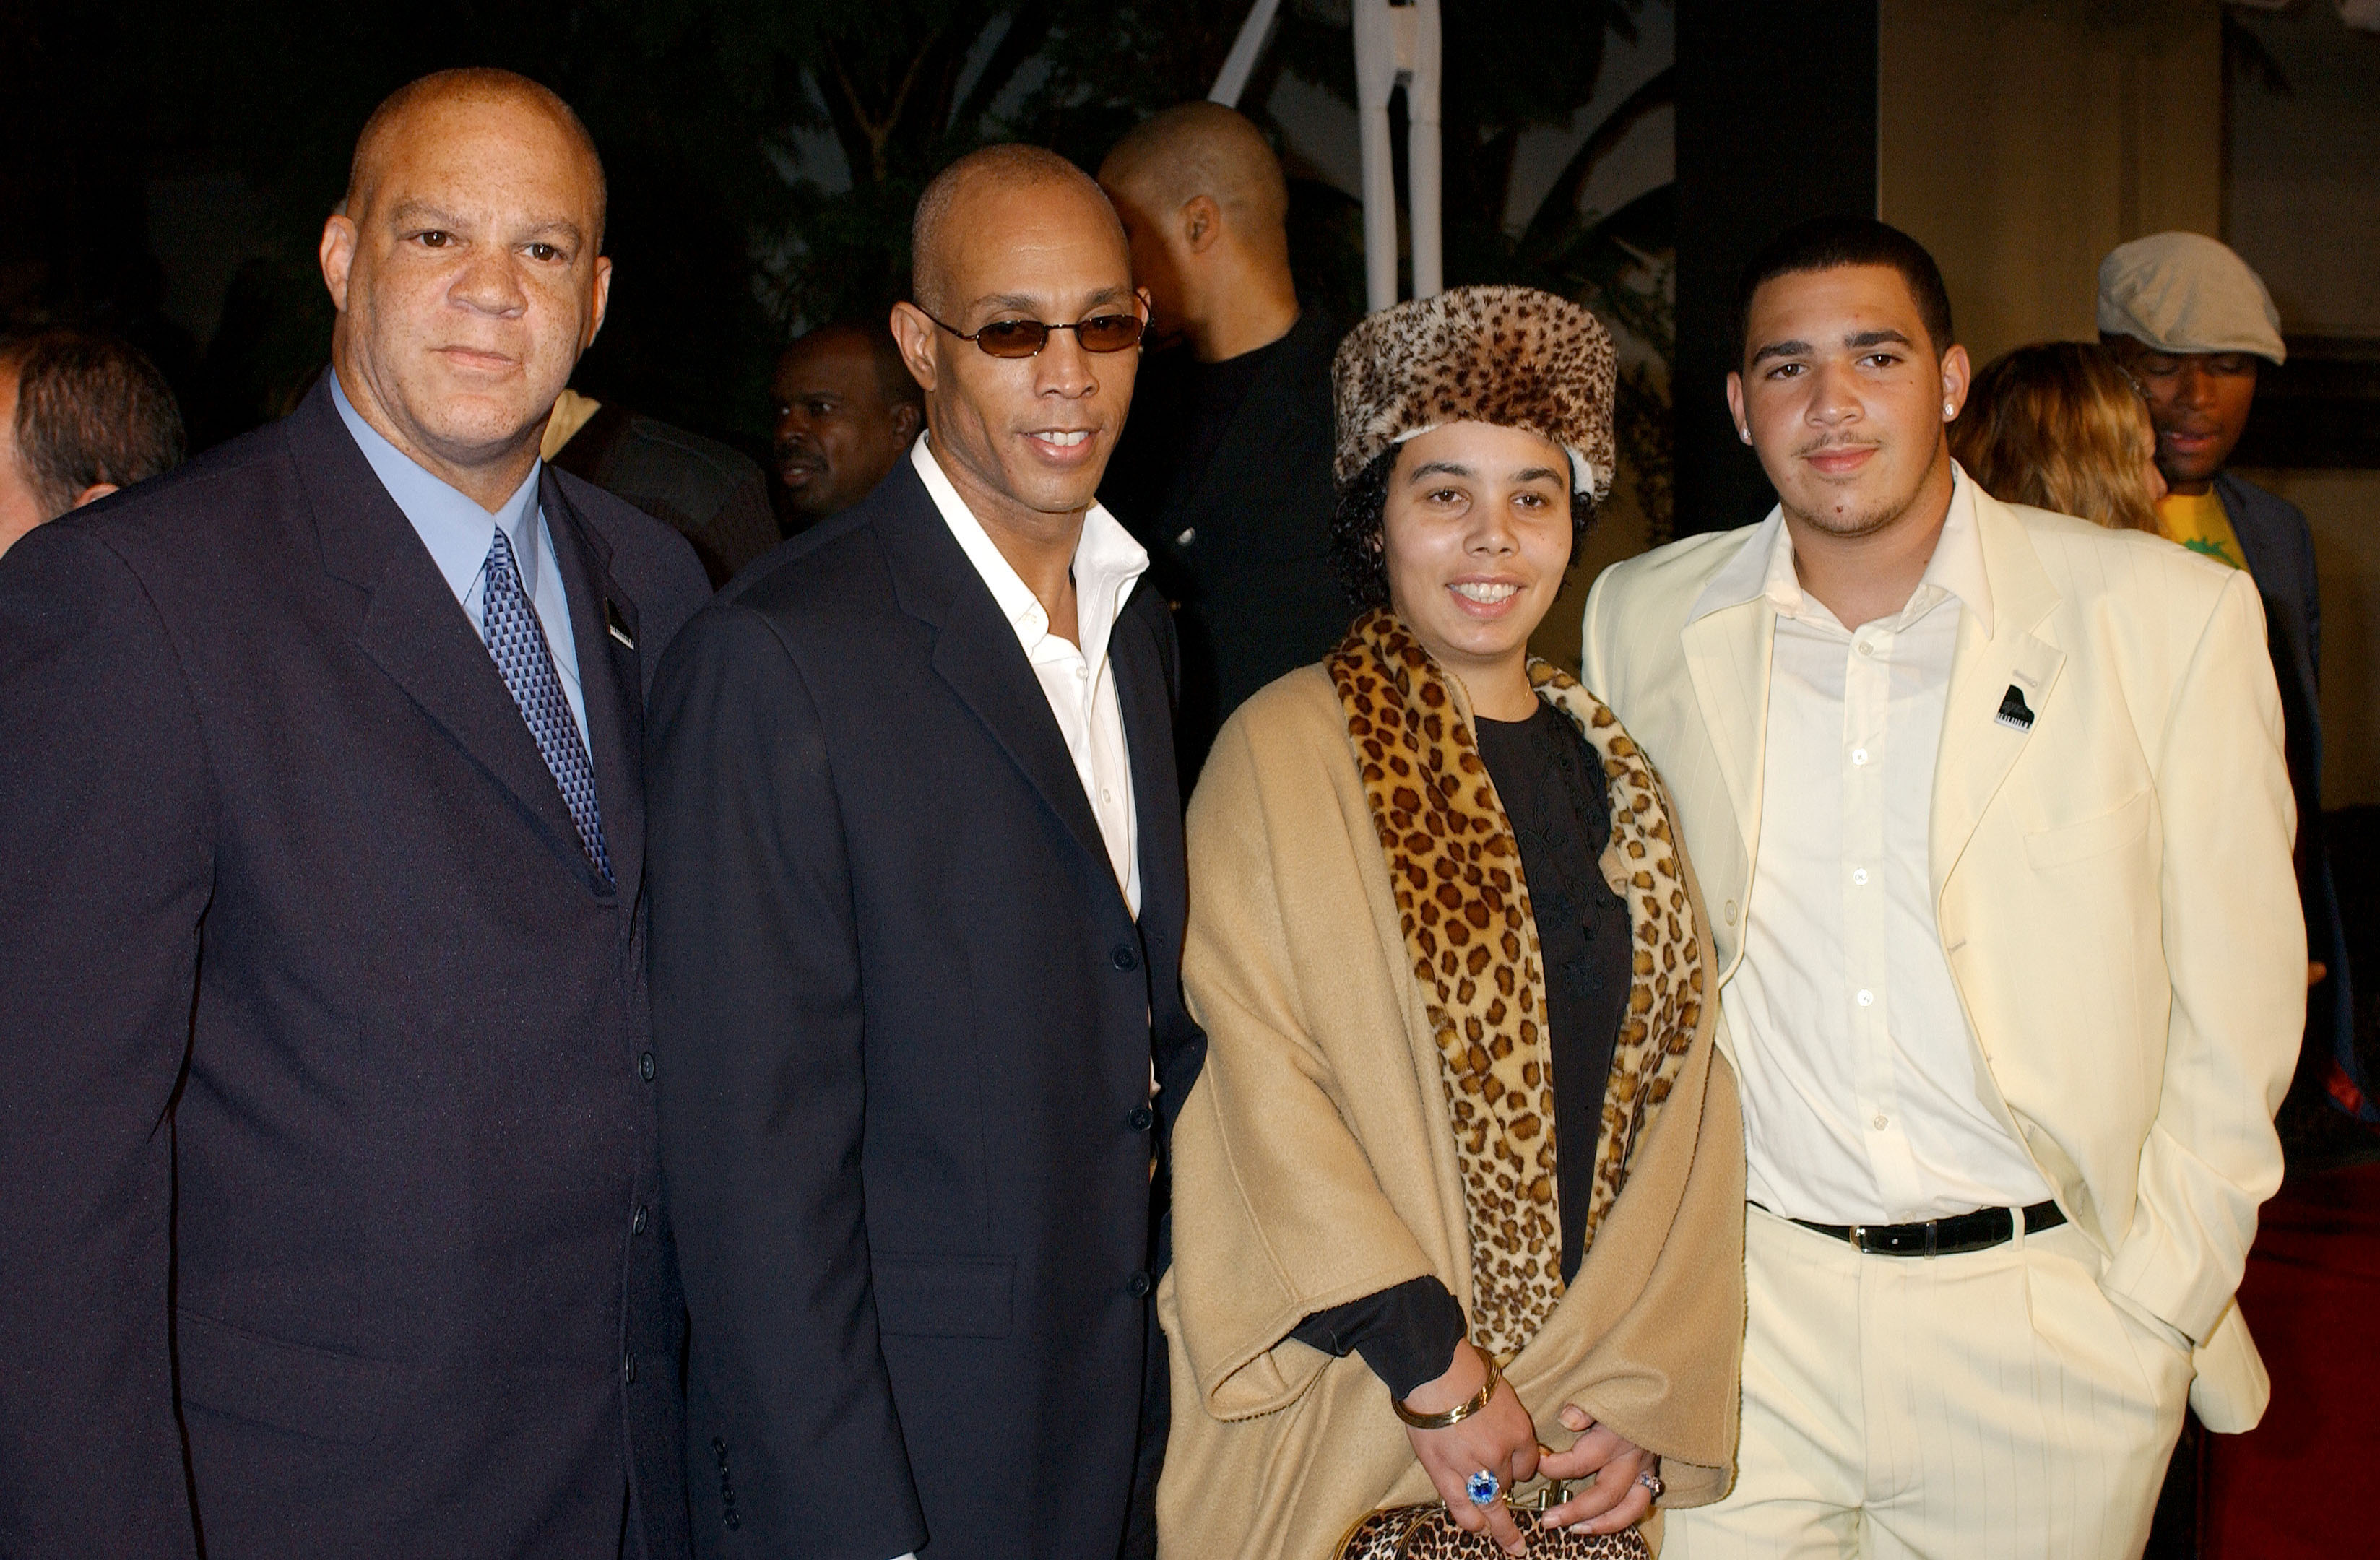 Rev. Robert Robinson Sr., Ray Charles Robinson Jr., Alexandria Robinson and Corey Robinson at the "Ray" Los Angeles Premiere on October 19, 2004 | Source: Getty Images